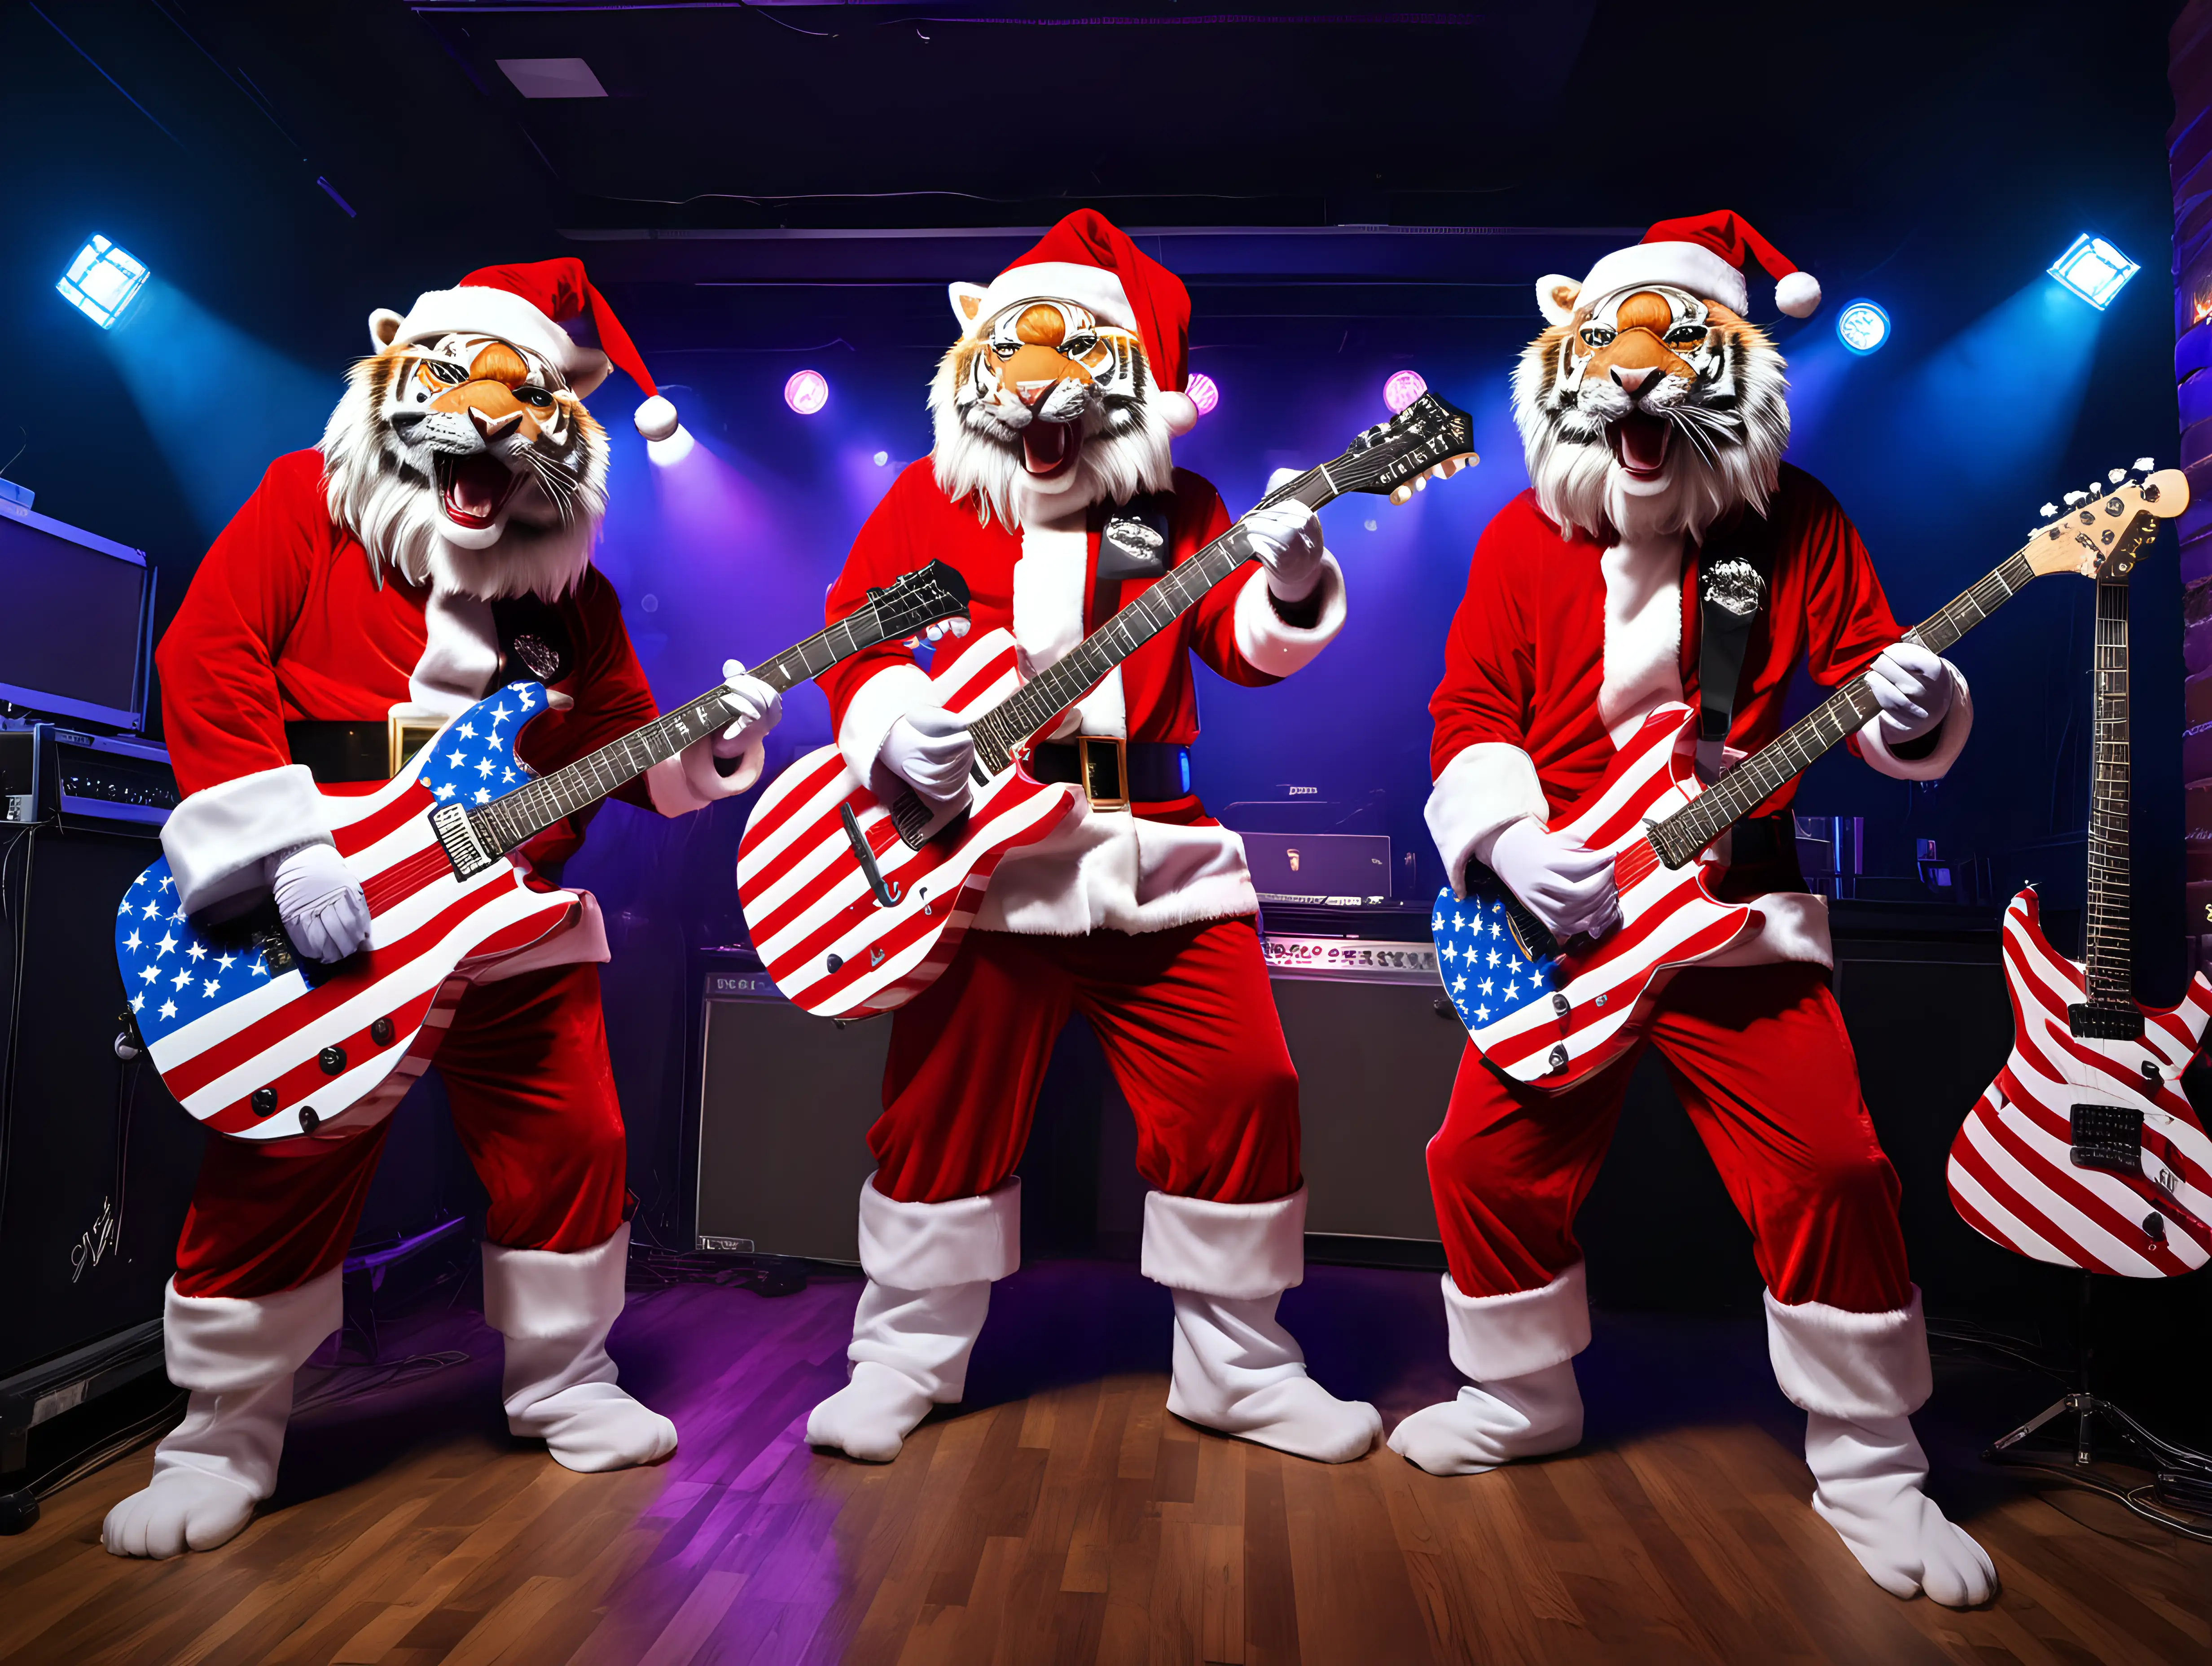 3 tigers playing stars and stripes guitars wearing 
Santa Claus costumes on a night club stage